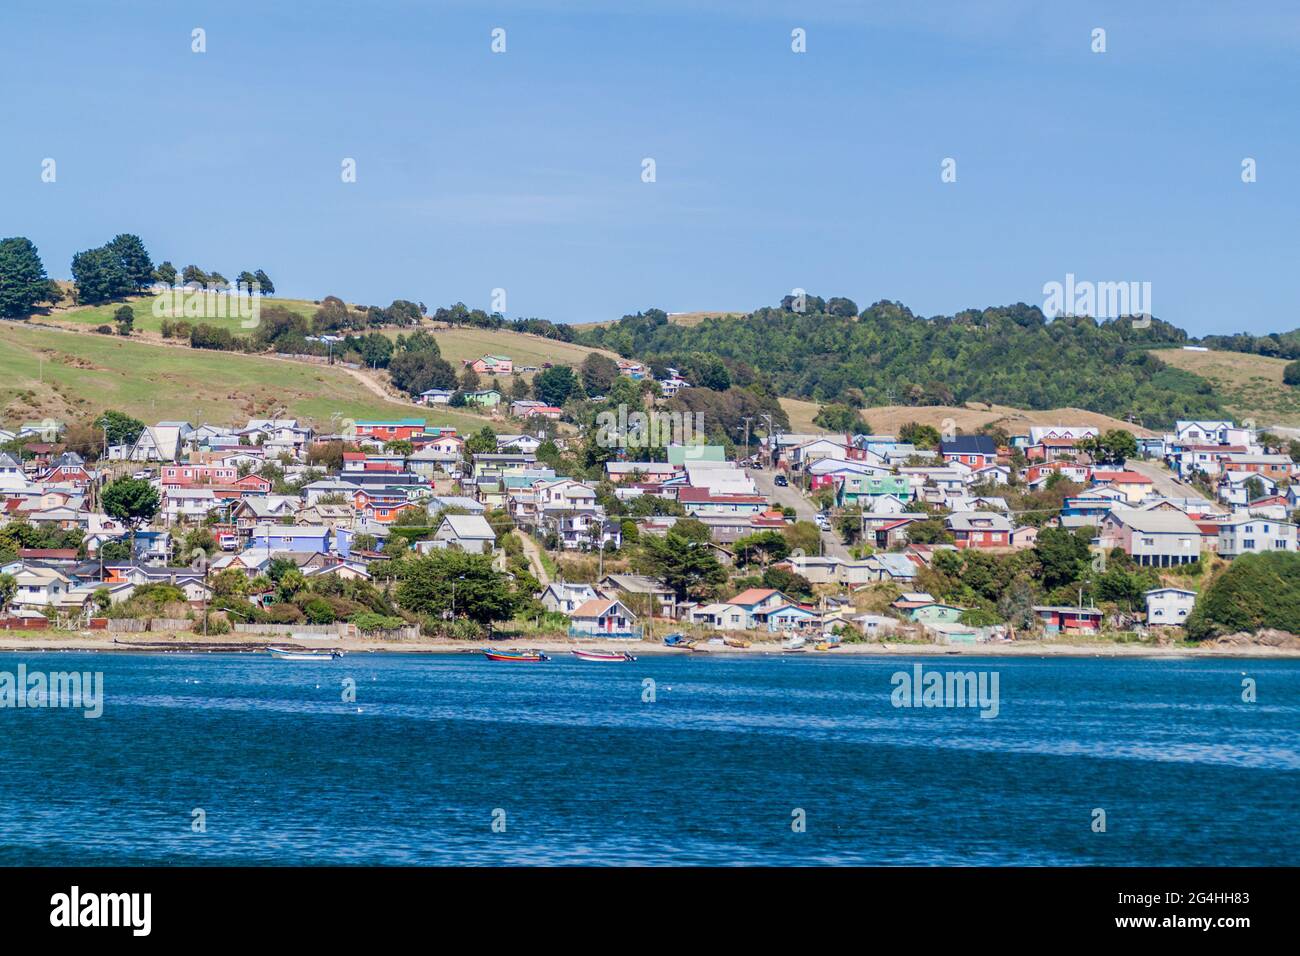 View of town Ancud, Chiloe island, Chile. Stock Photo